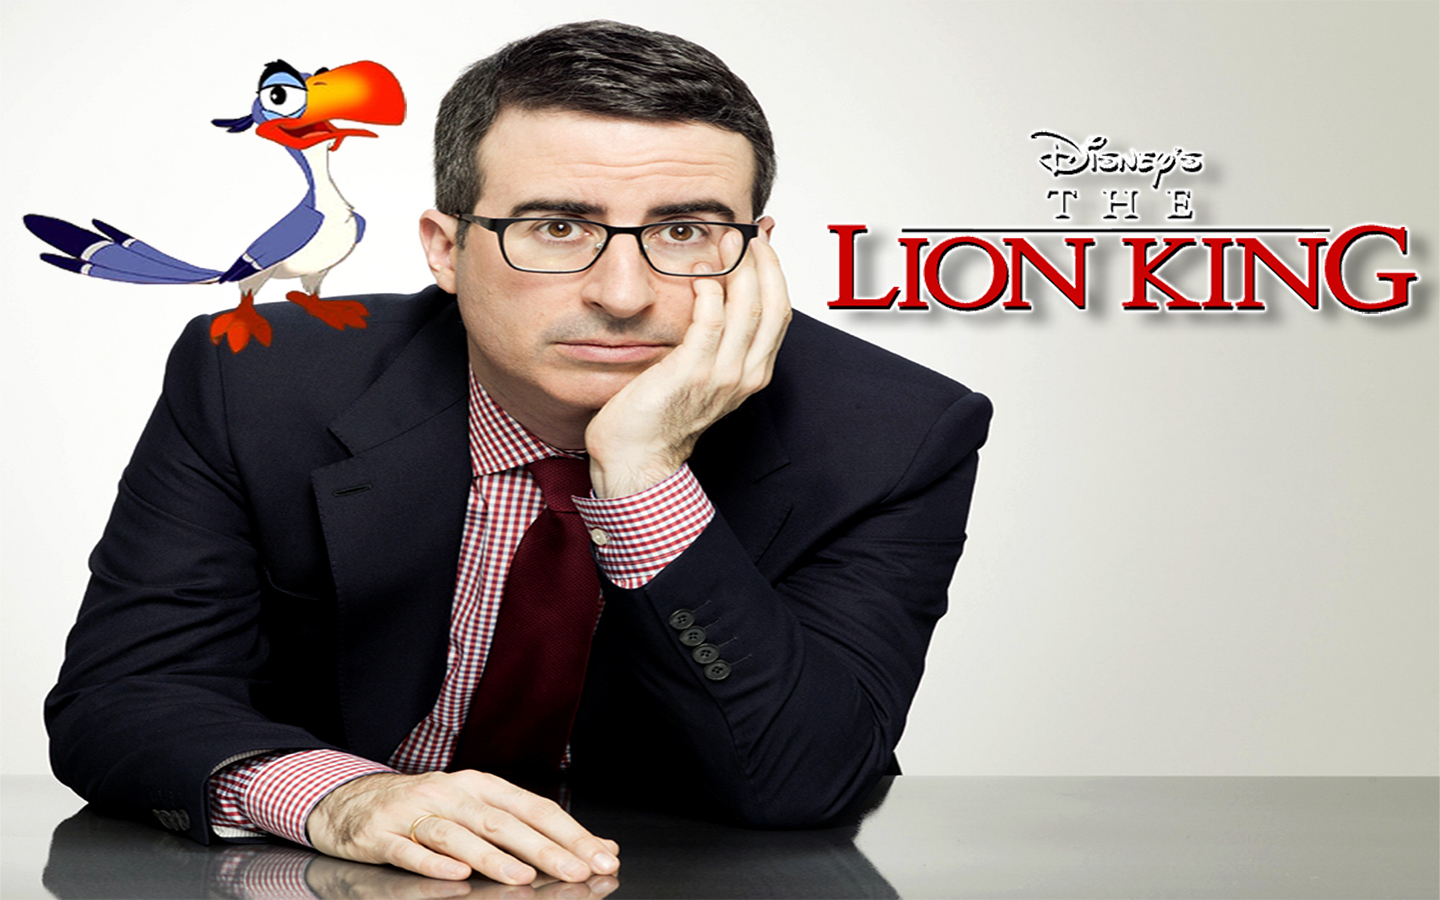 John Oliver to Play Zazu in Live Action Lion King